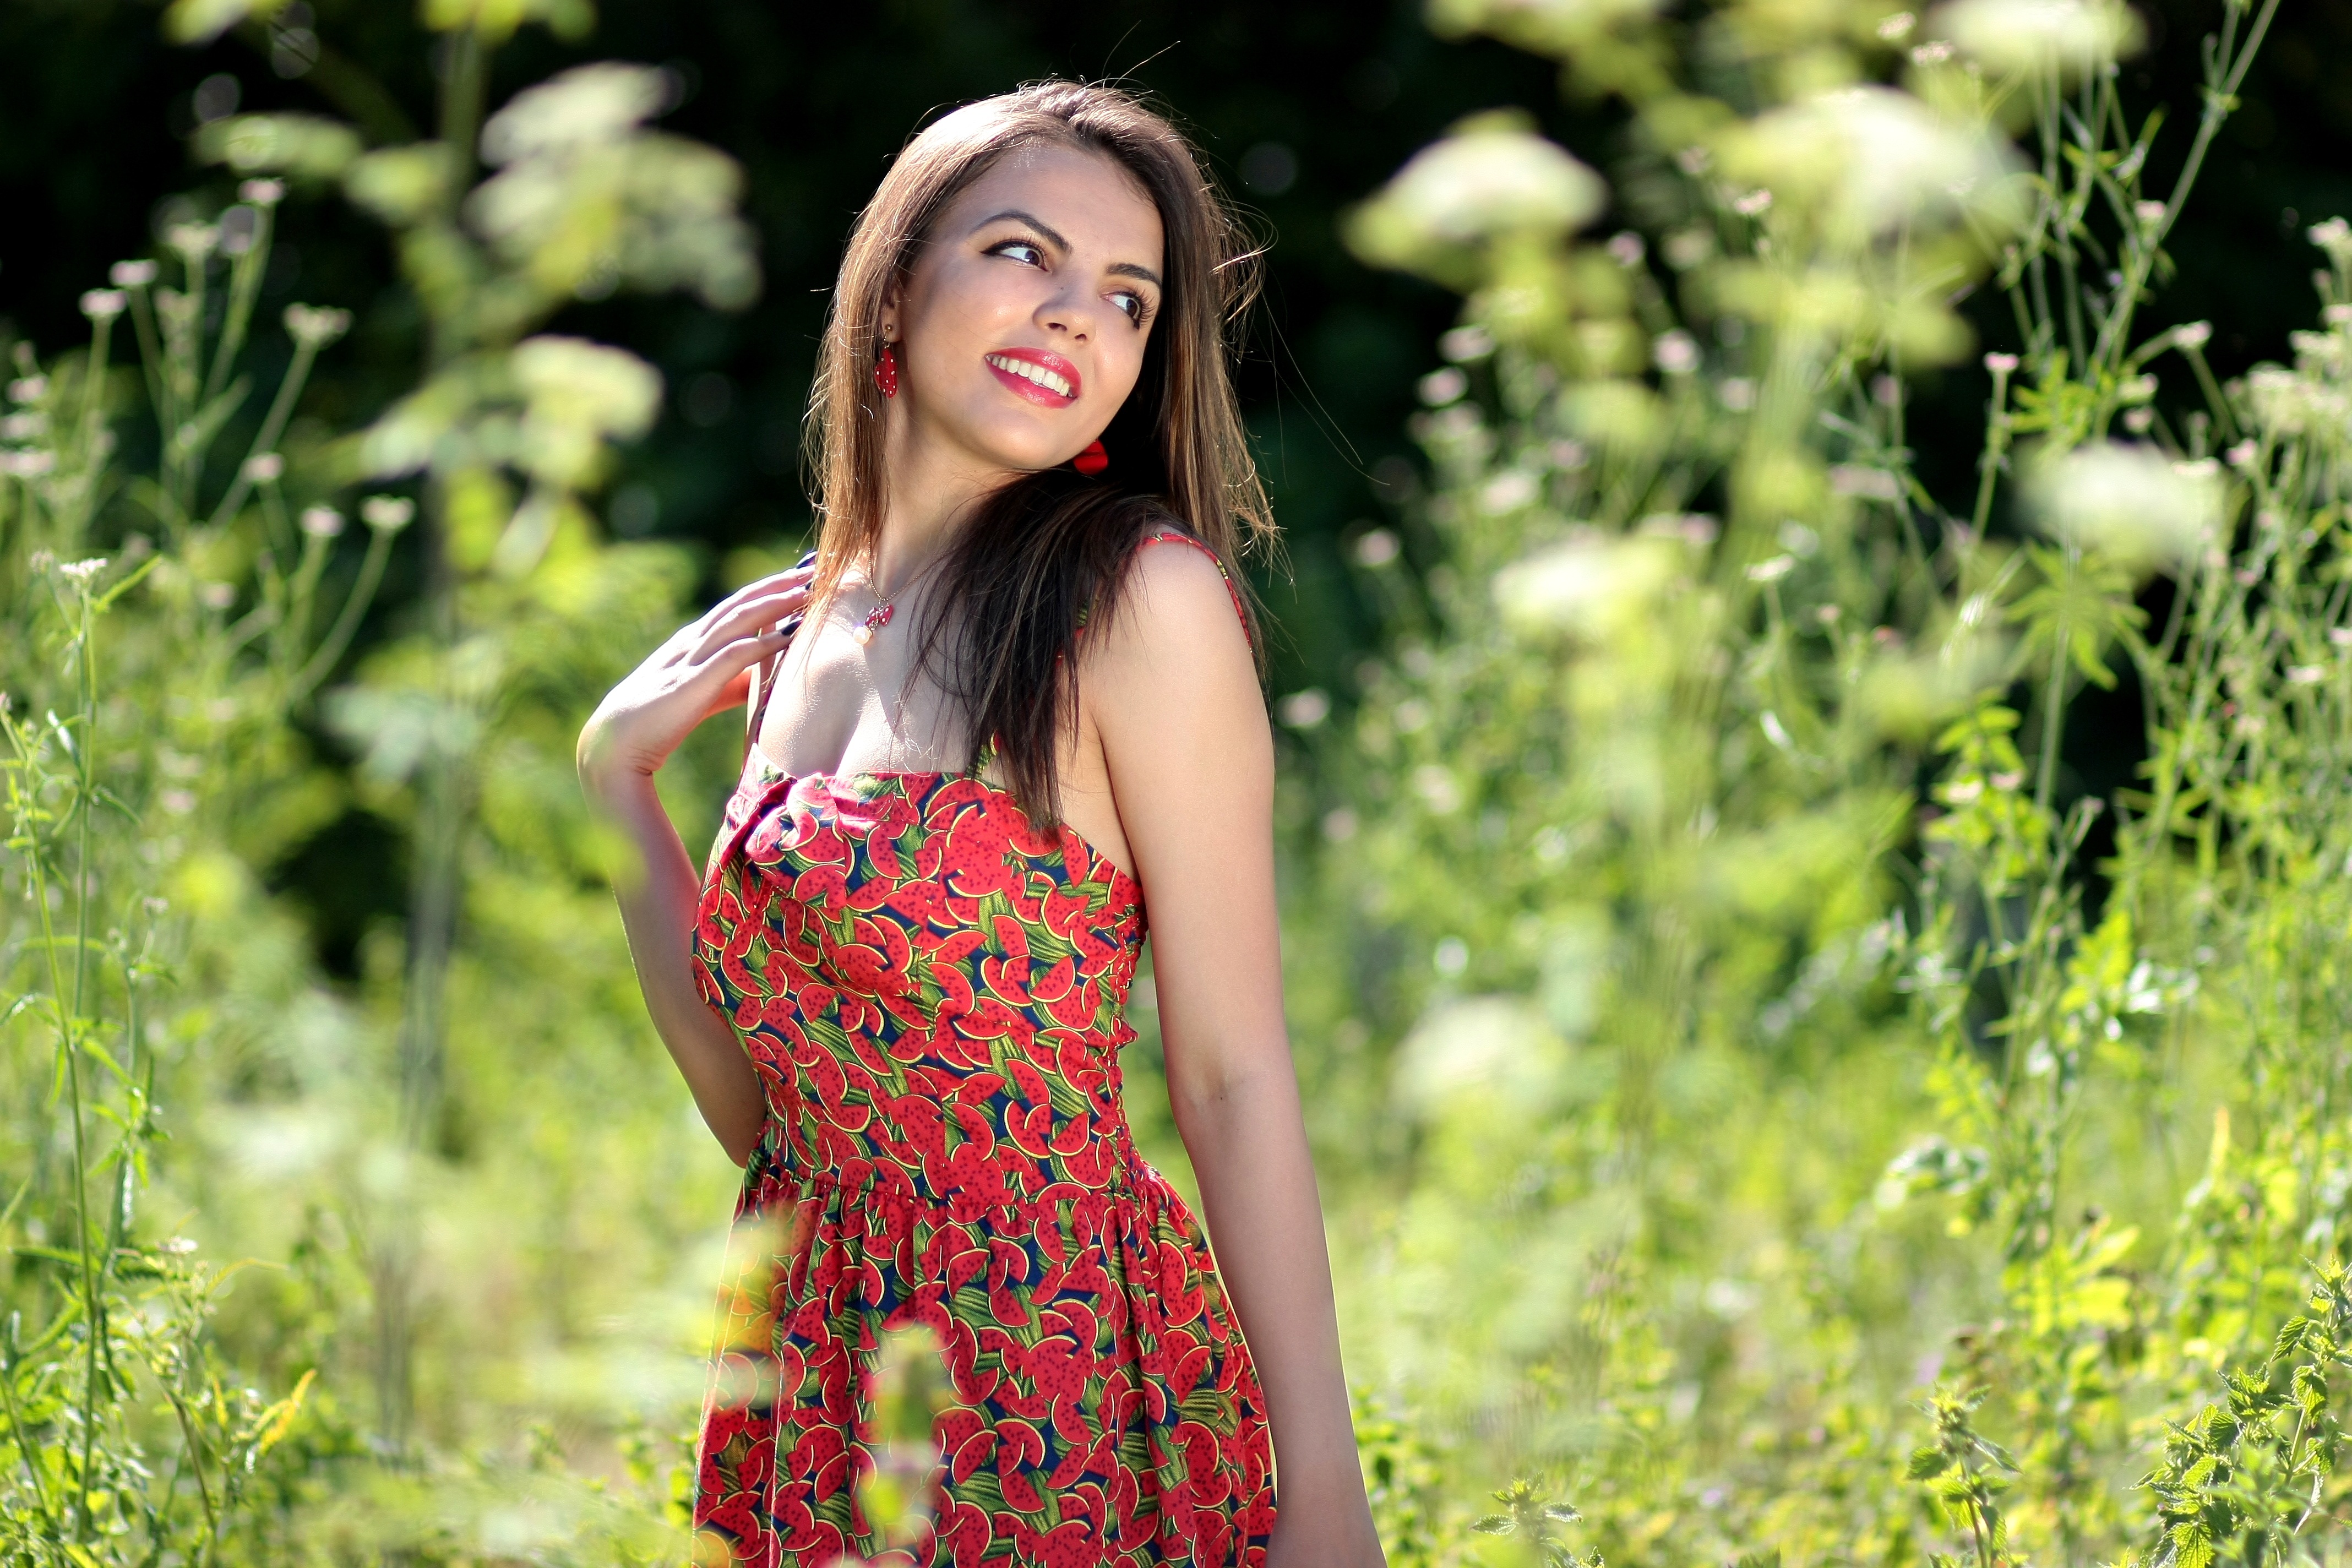 Free Images : grass, person, girl, woman, lawn, meadow, flower ...